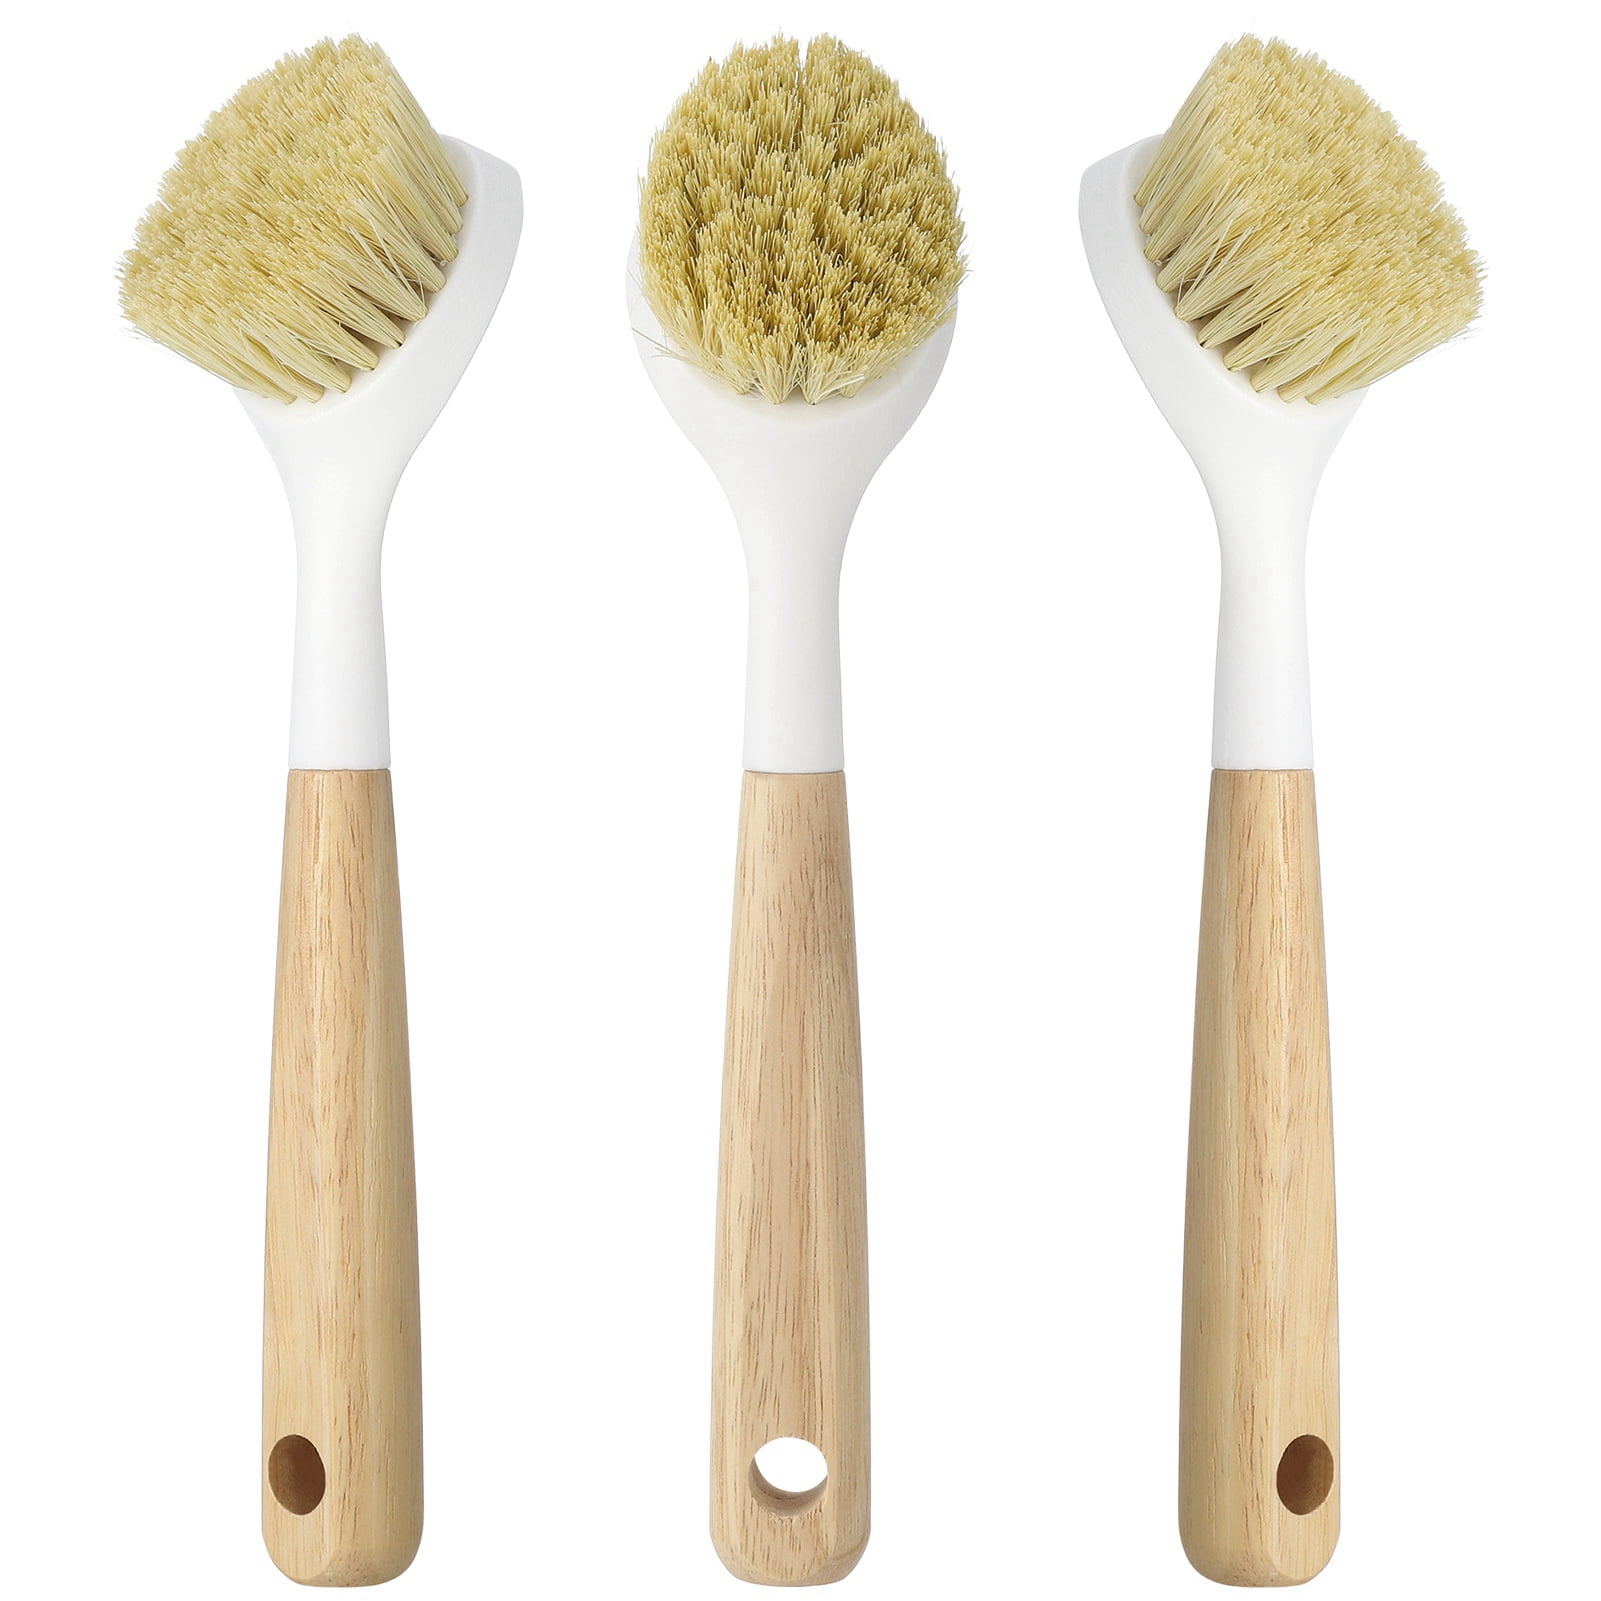 OAVQHLG3B Long Handle Dish Brush with 2 Replaceable Scrubbers